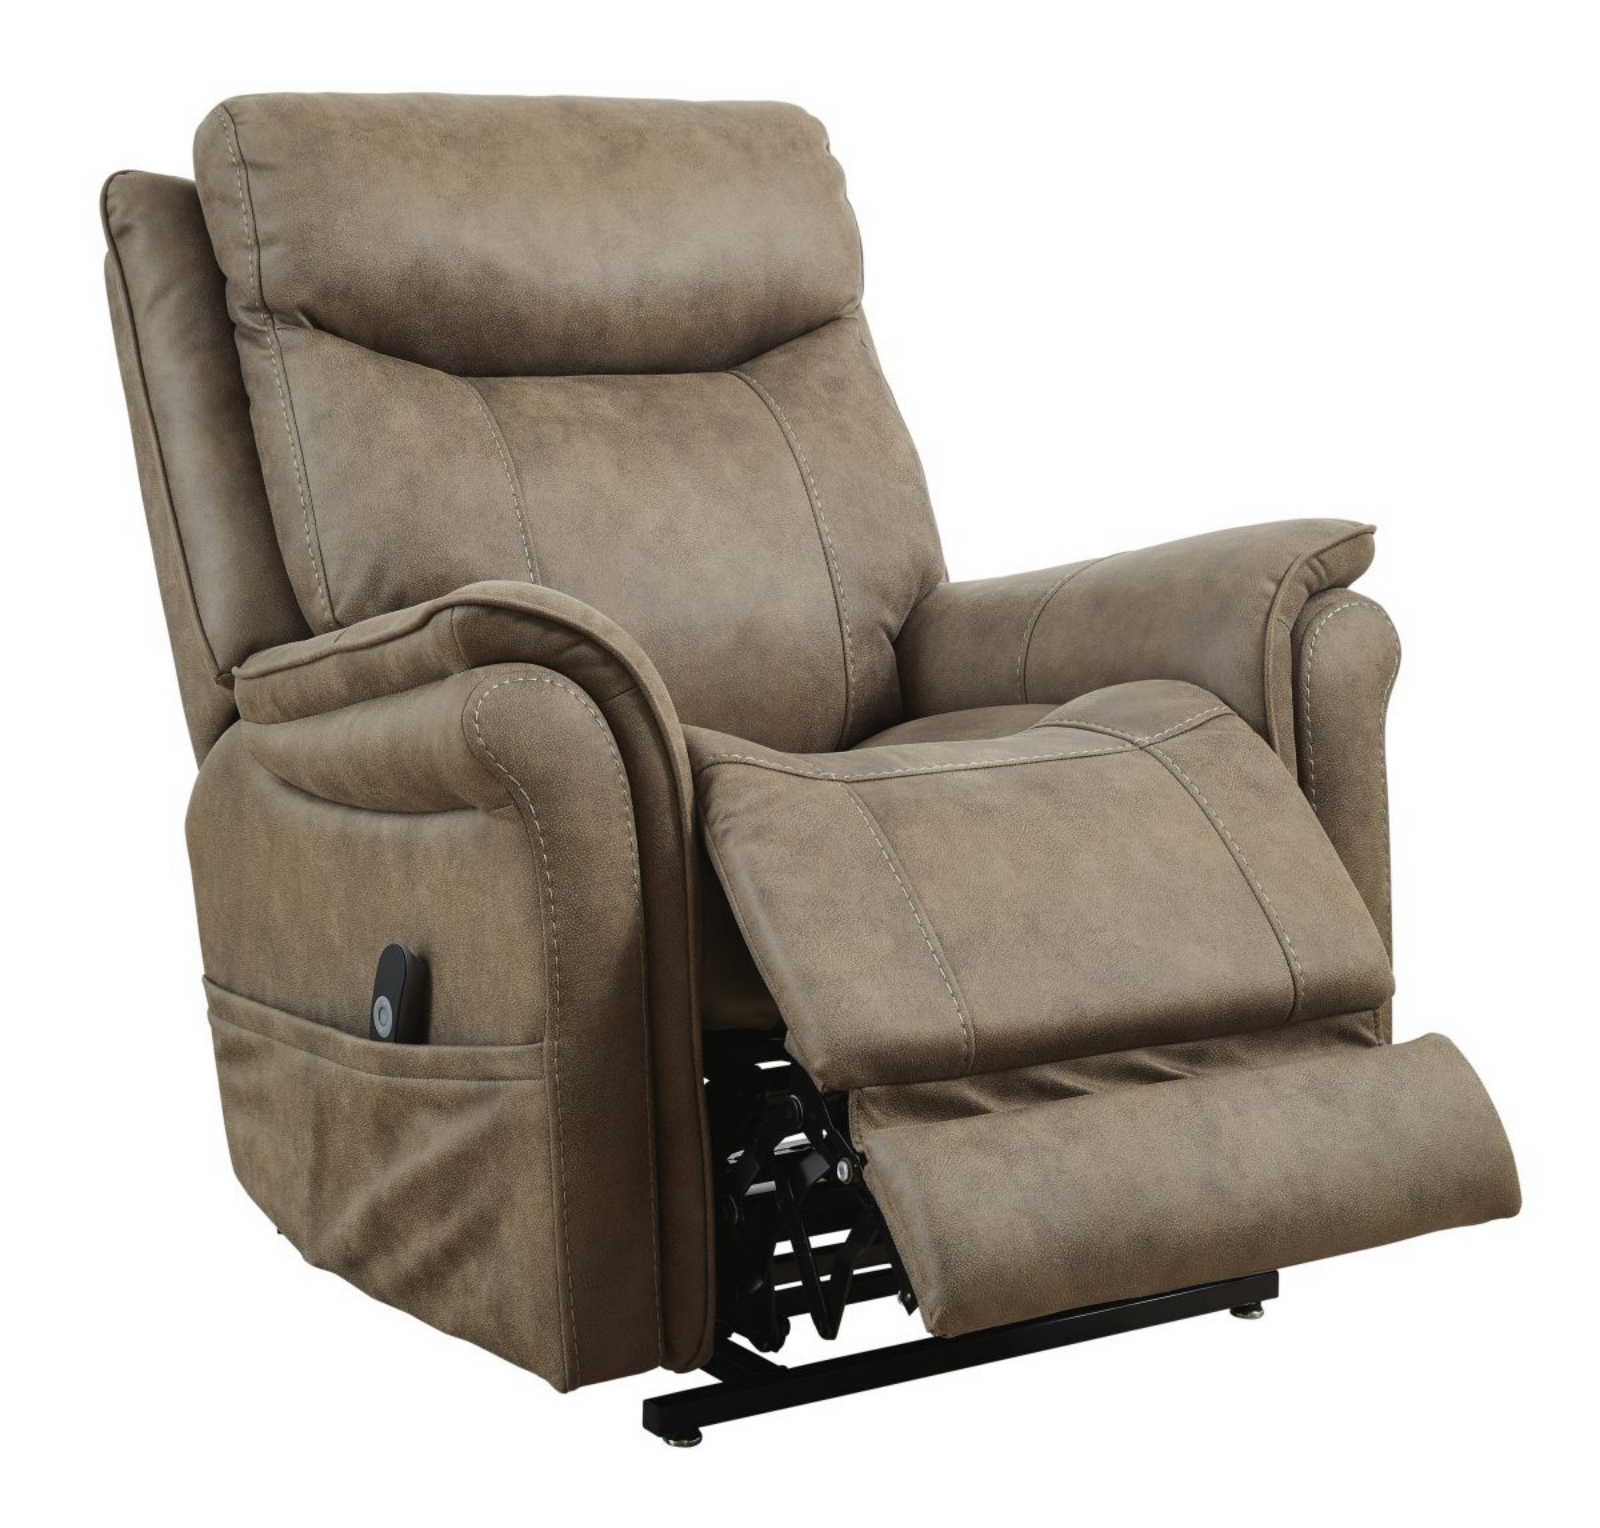 Picture of Lorreze Lift Chair